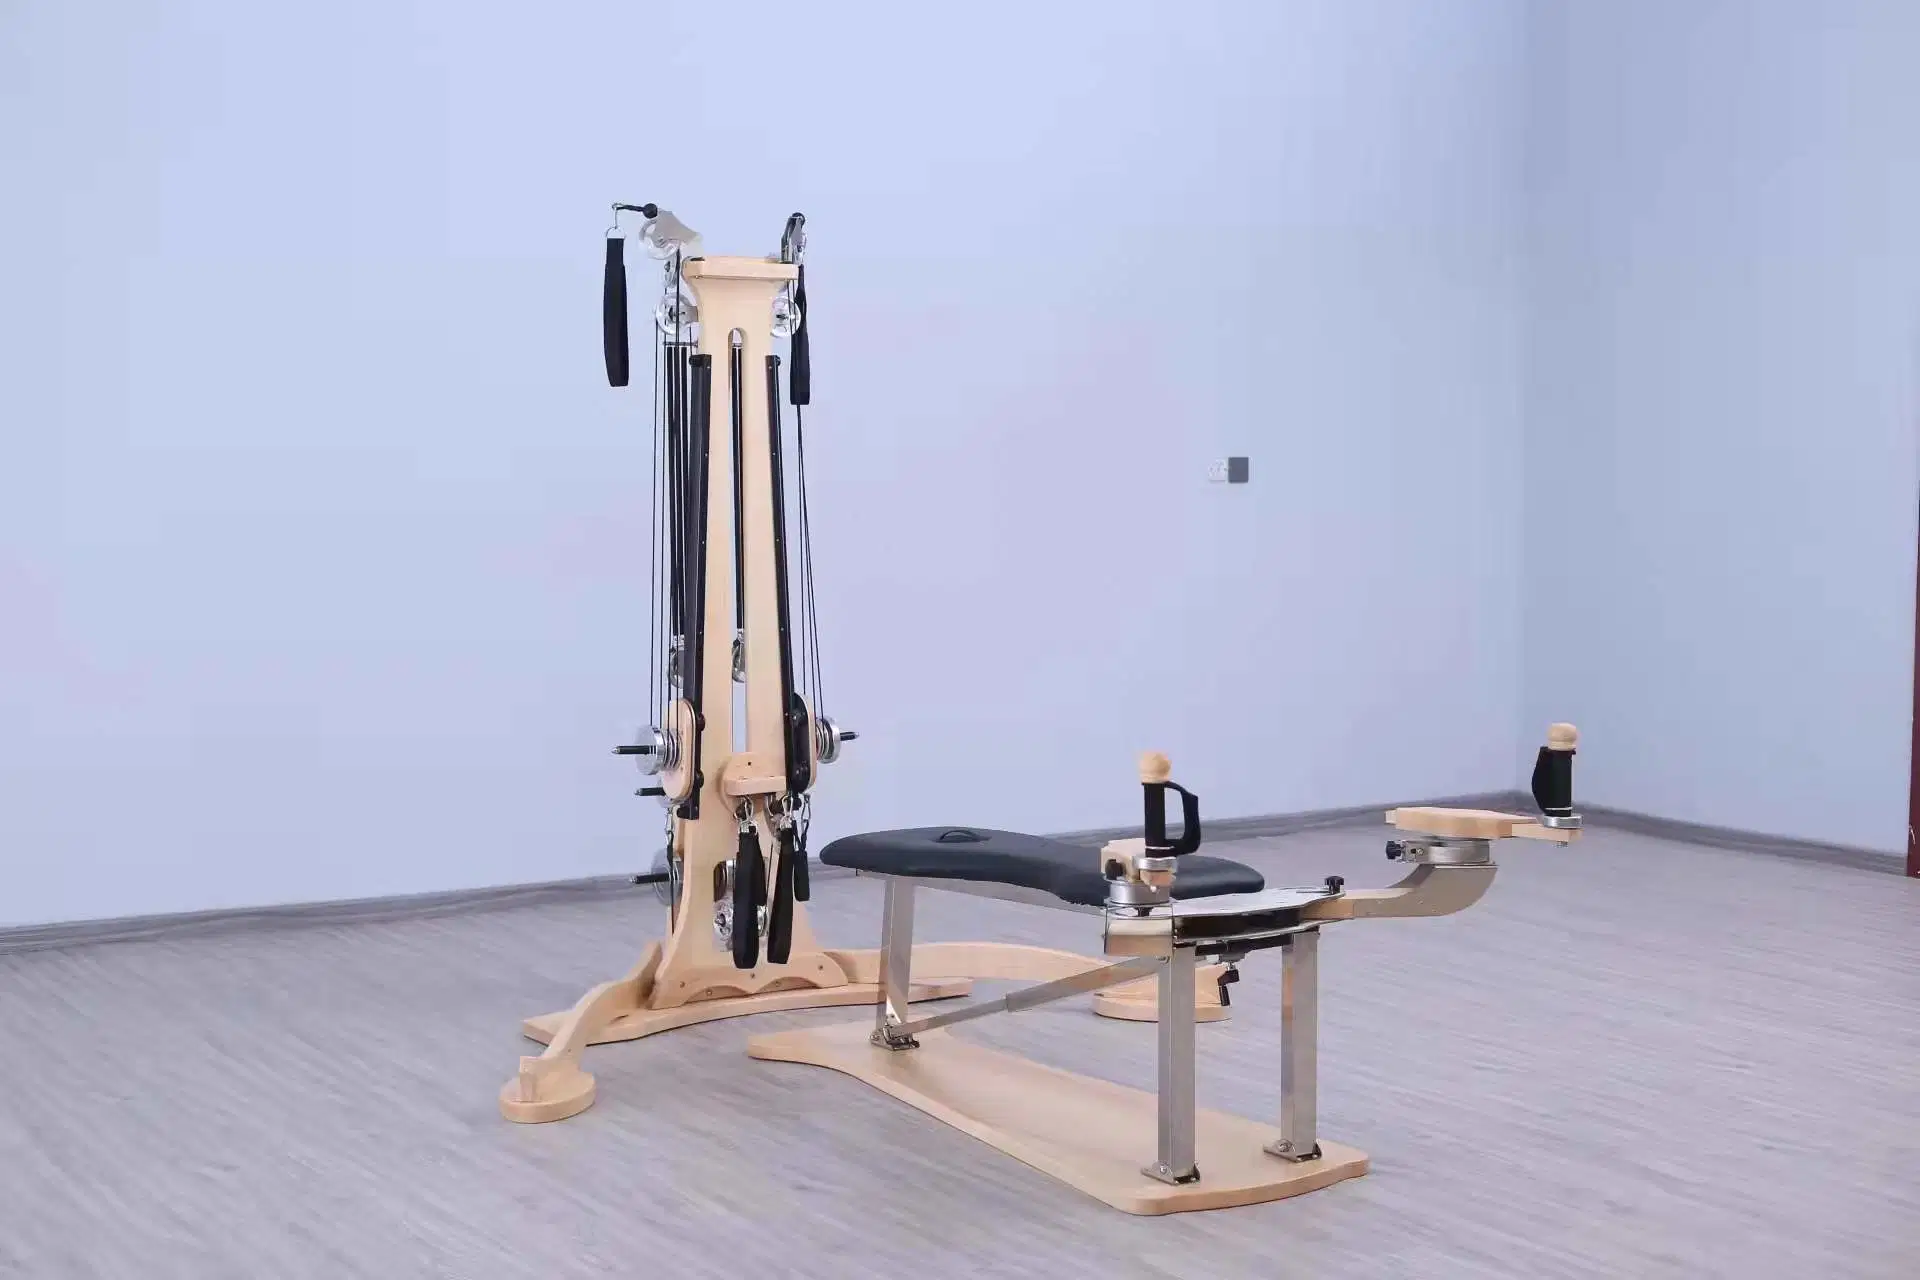 PRO Yoga Body Building Gym Home Fitness Equipment Oak Wood Pilates Reformers Bed Machine Pilates Pulley Tower Combination Unit -Pilates Equipment